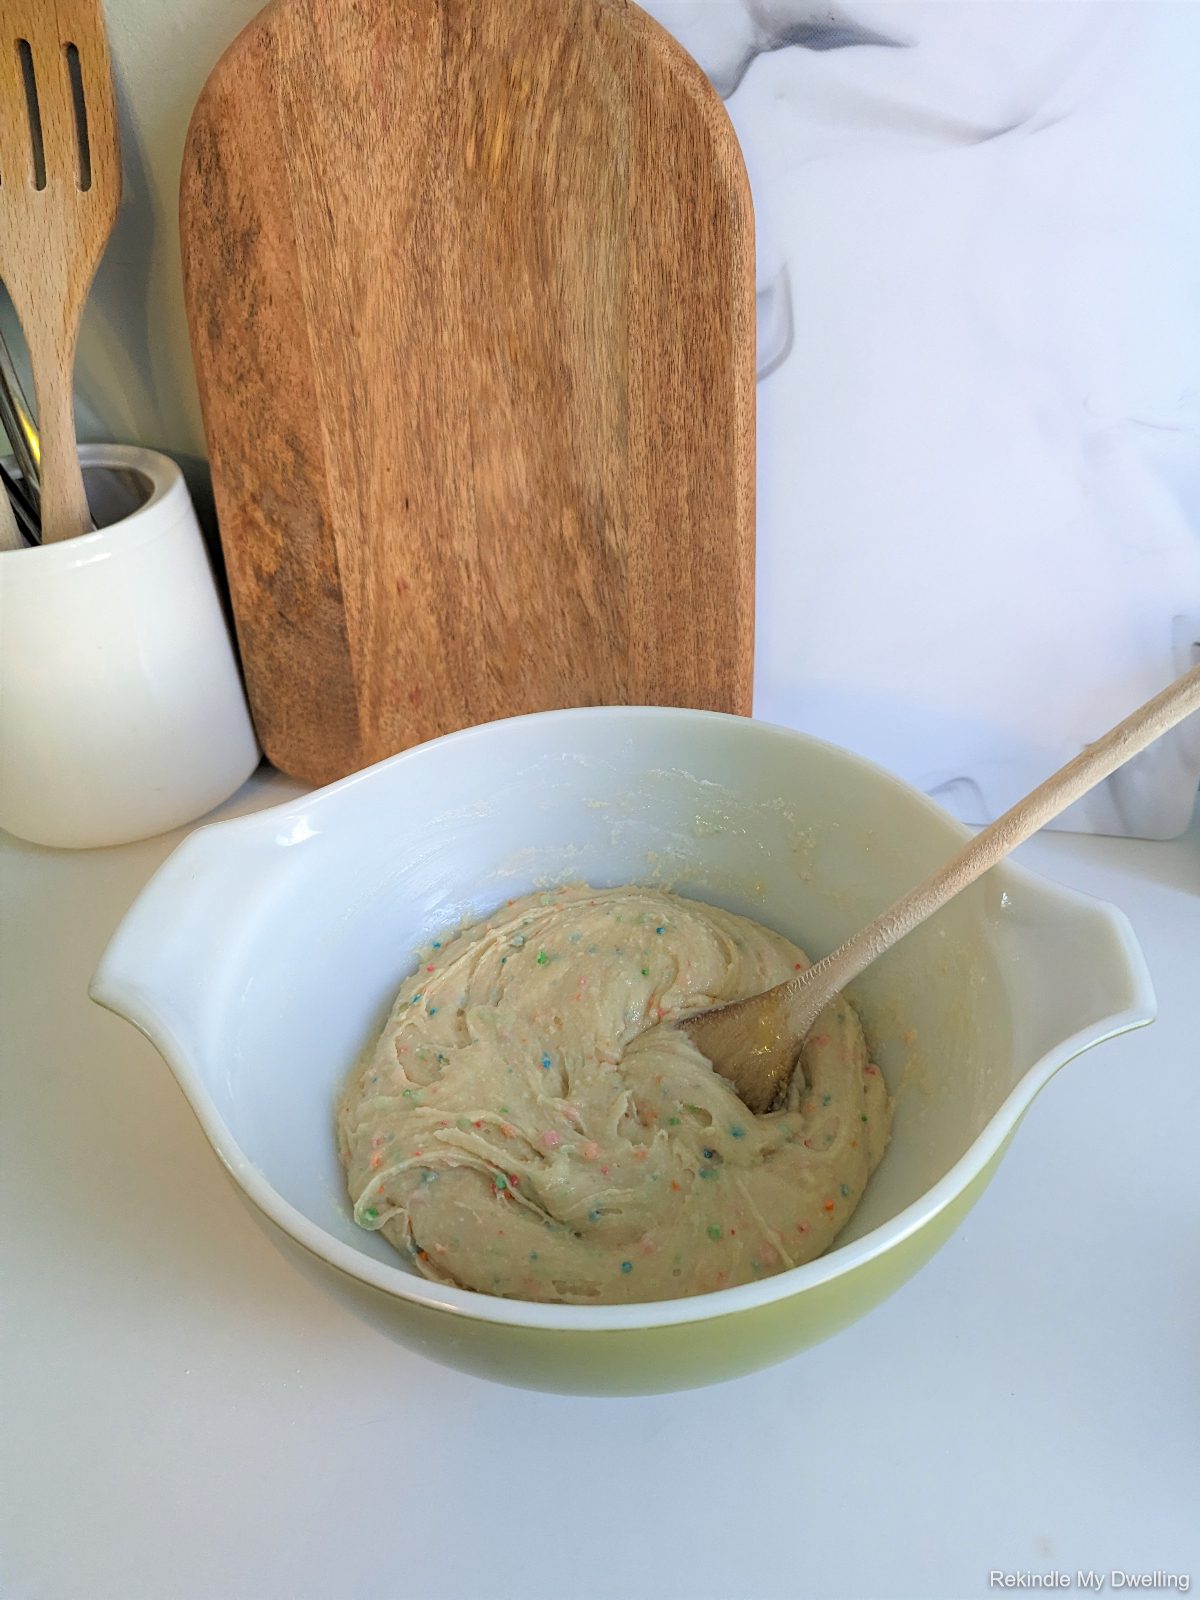 Mixing ingredients in a bowl with a wooden spoon.